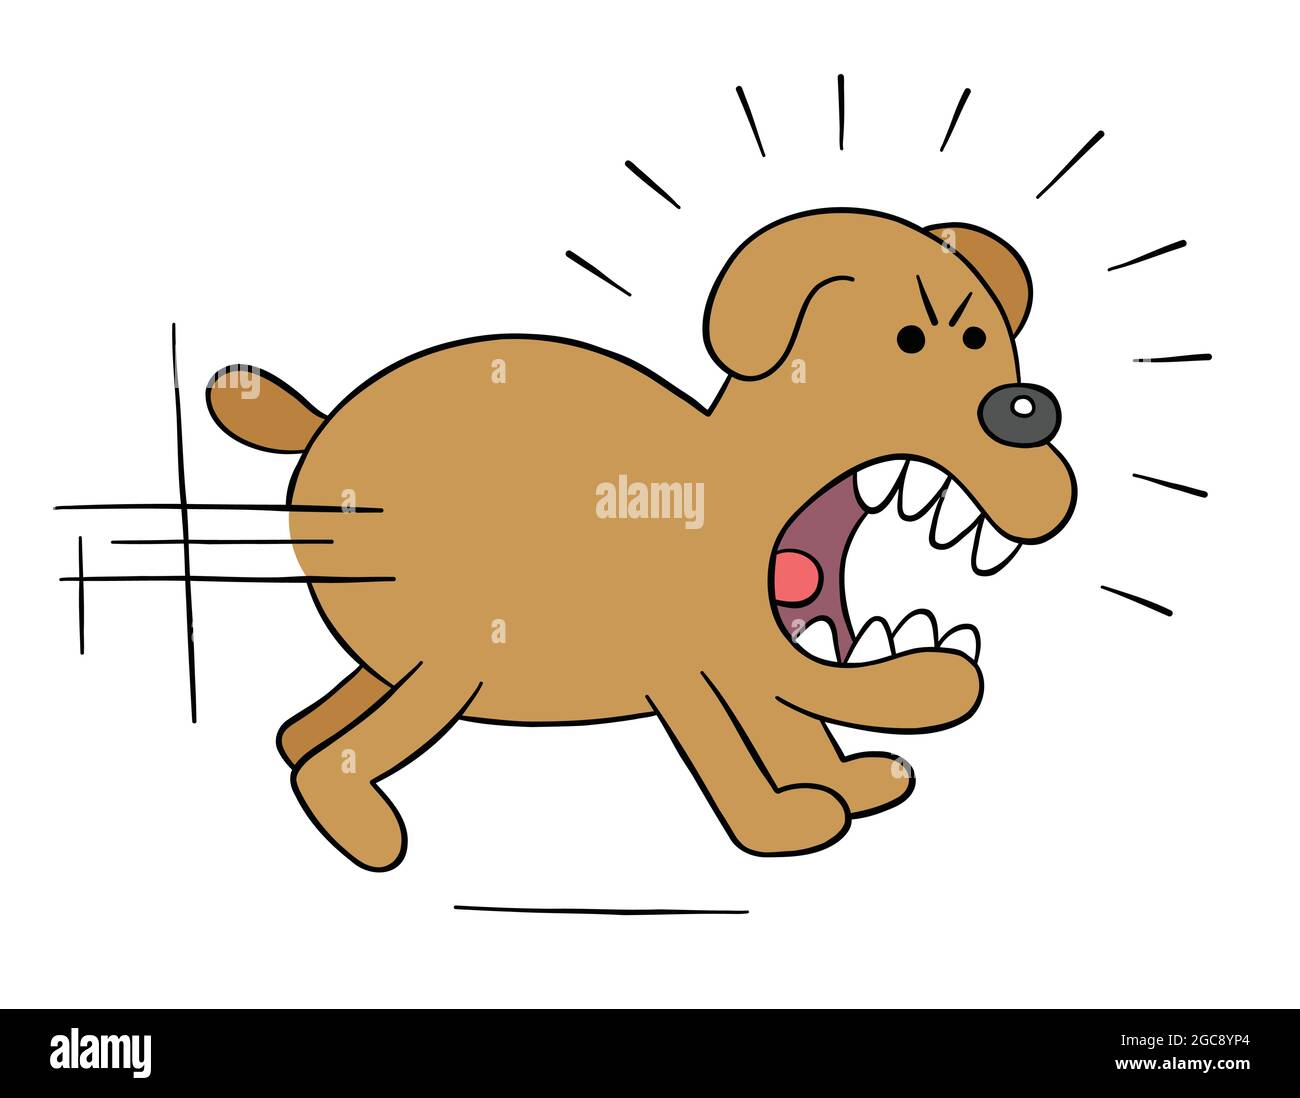 Cartoon angry dog chasing, vector illustration. Colored and black outlines. Stock Vector